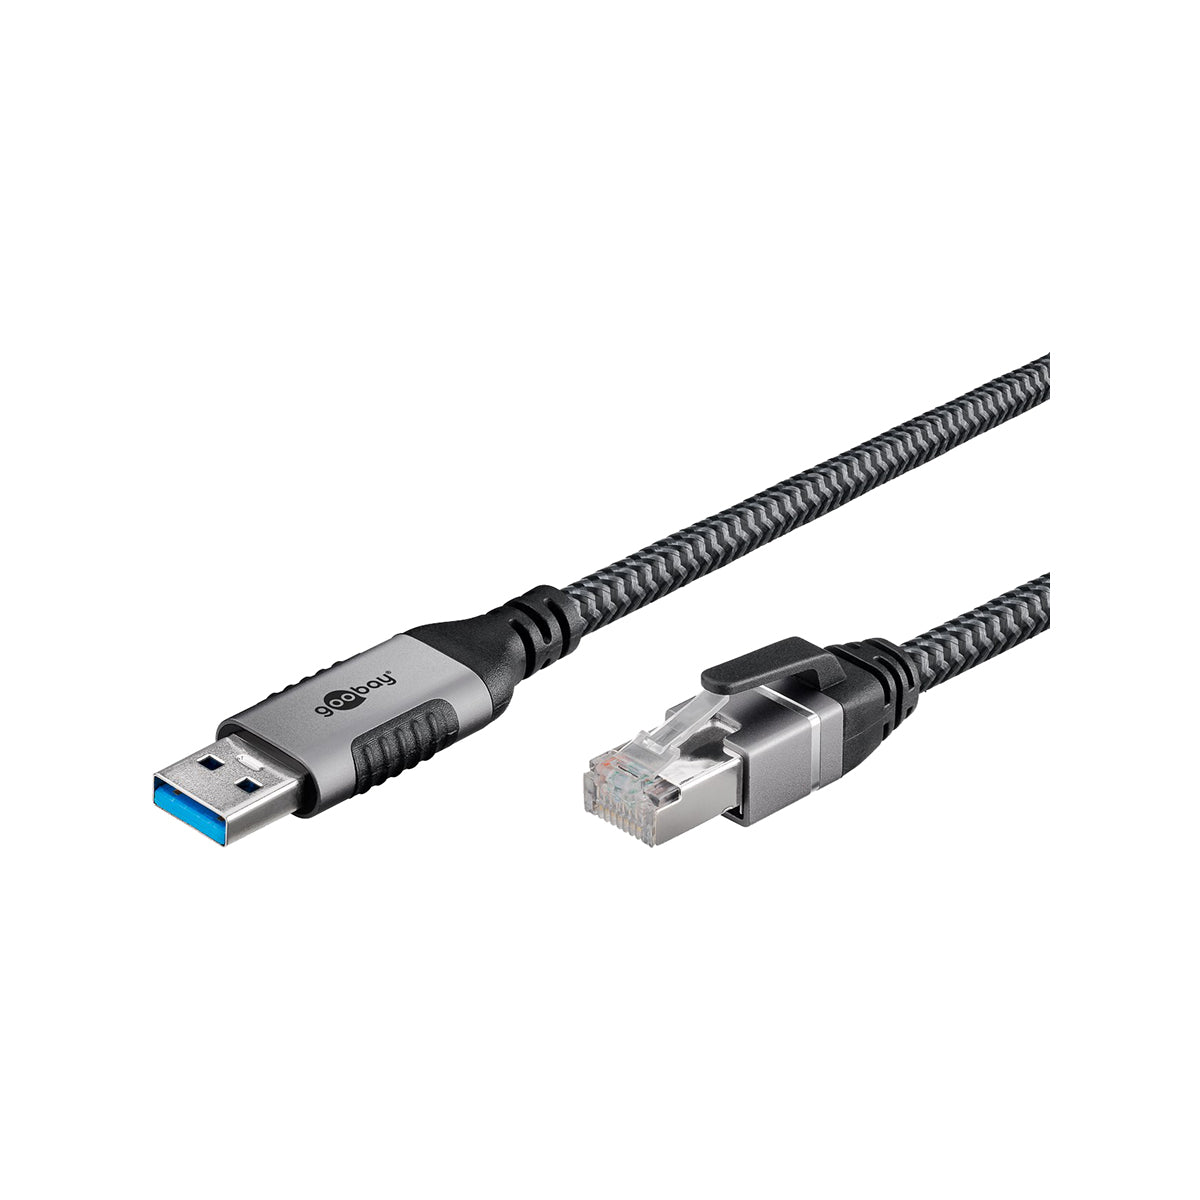 GooBay USB-A 3.0 to RJ45 Ethernet Cable 5m for PC/Laptop - Black